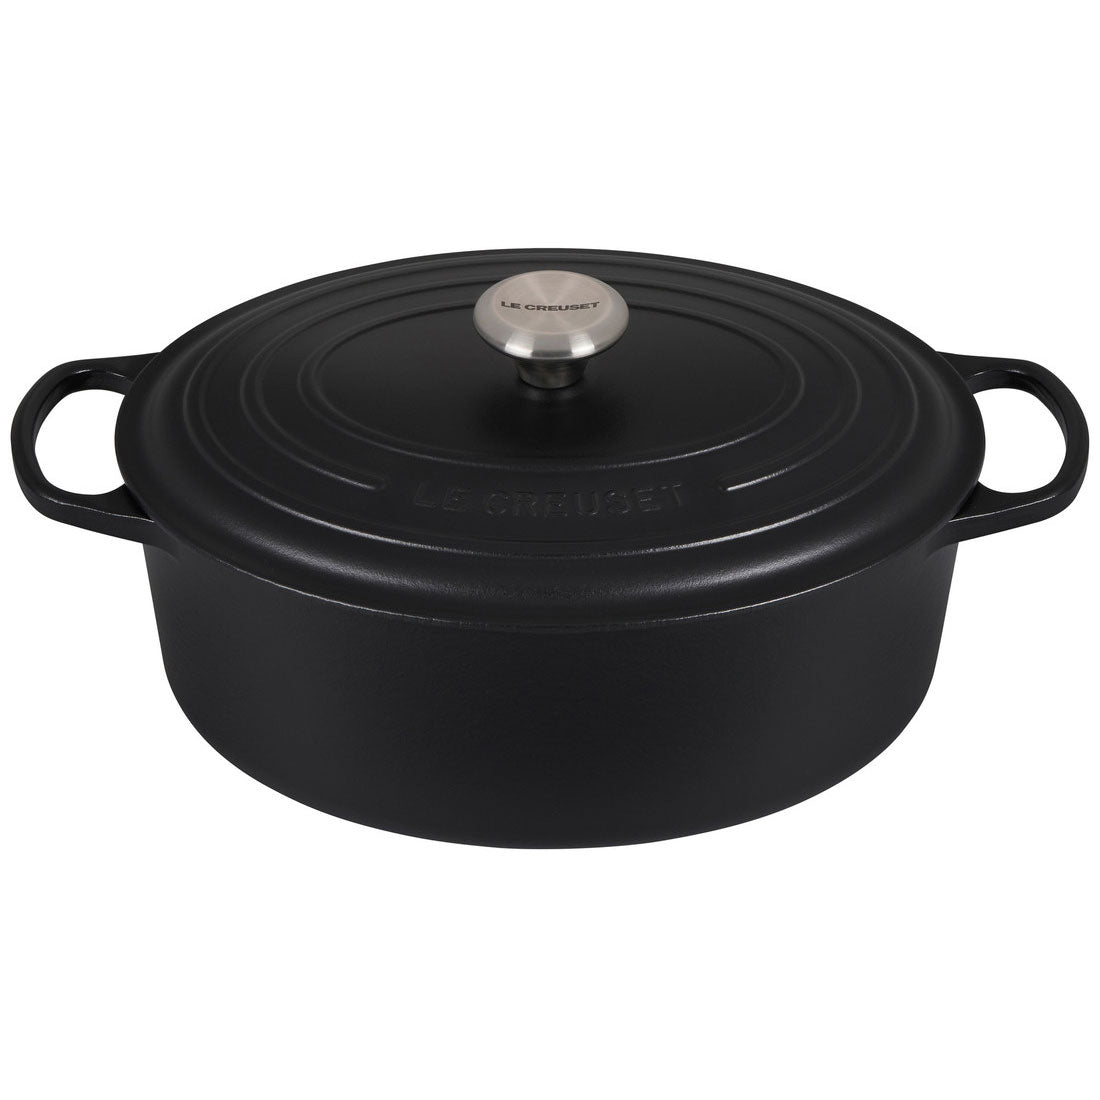 Le Creuset Signature Enameled Cast Iron Chef's Oven With Stainless